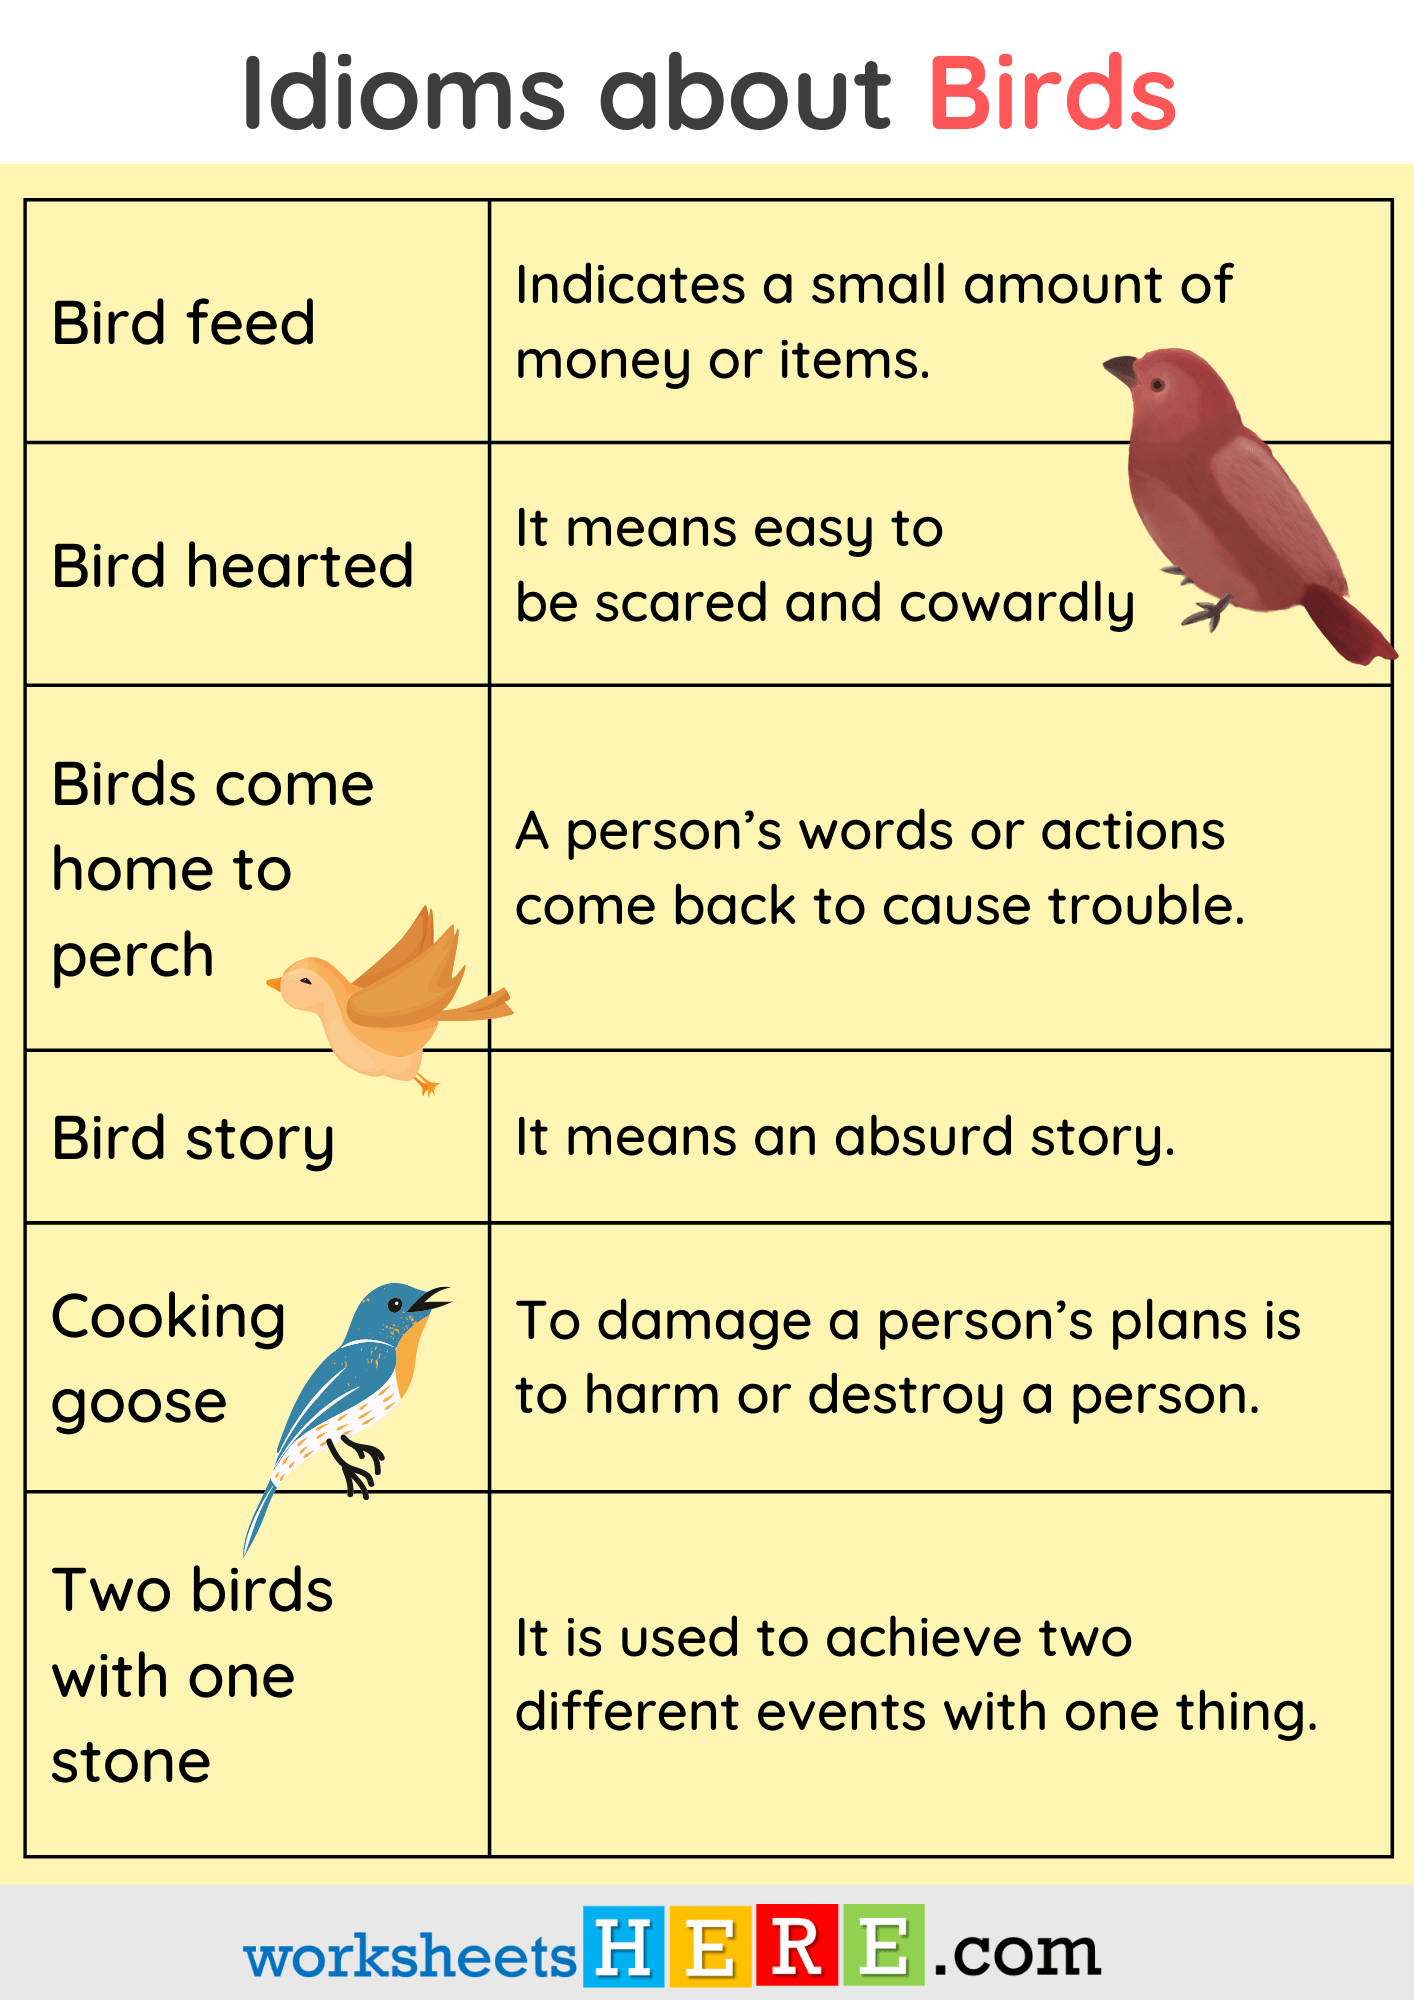 Idioms about Birds and Meaning PDF Worksheet For Students and Kids